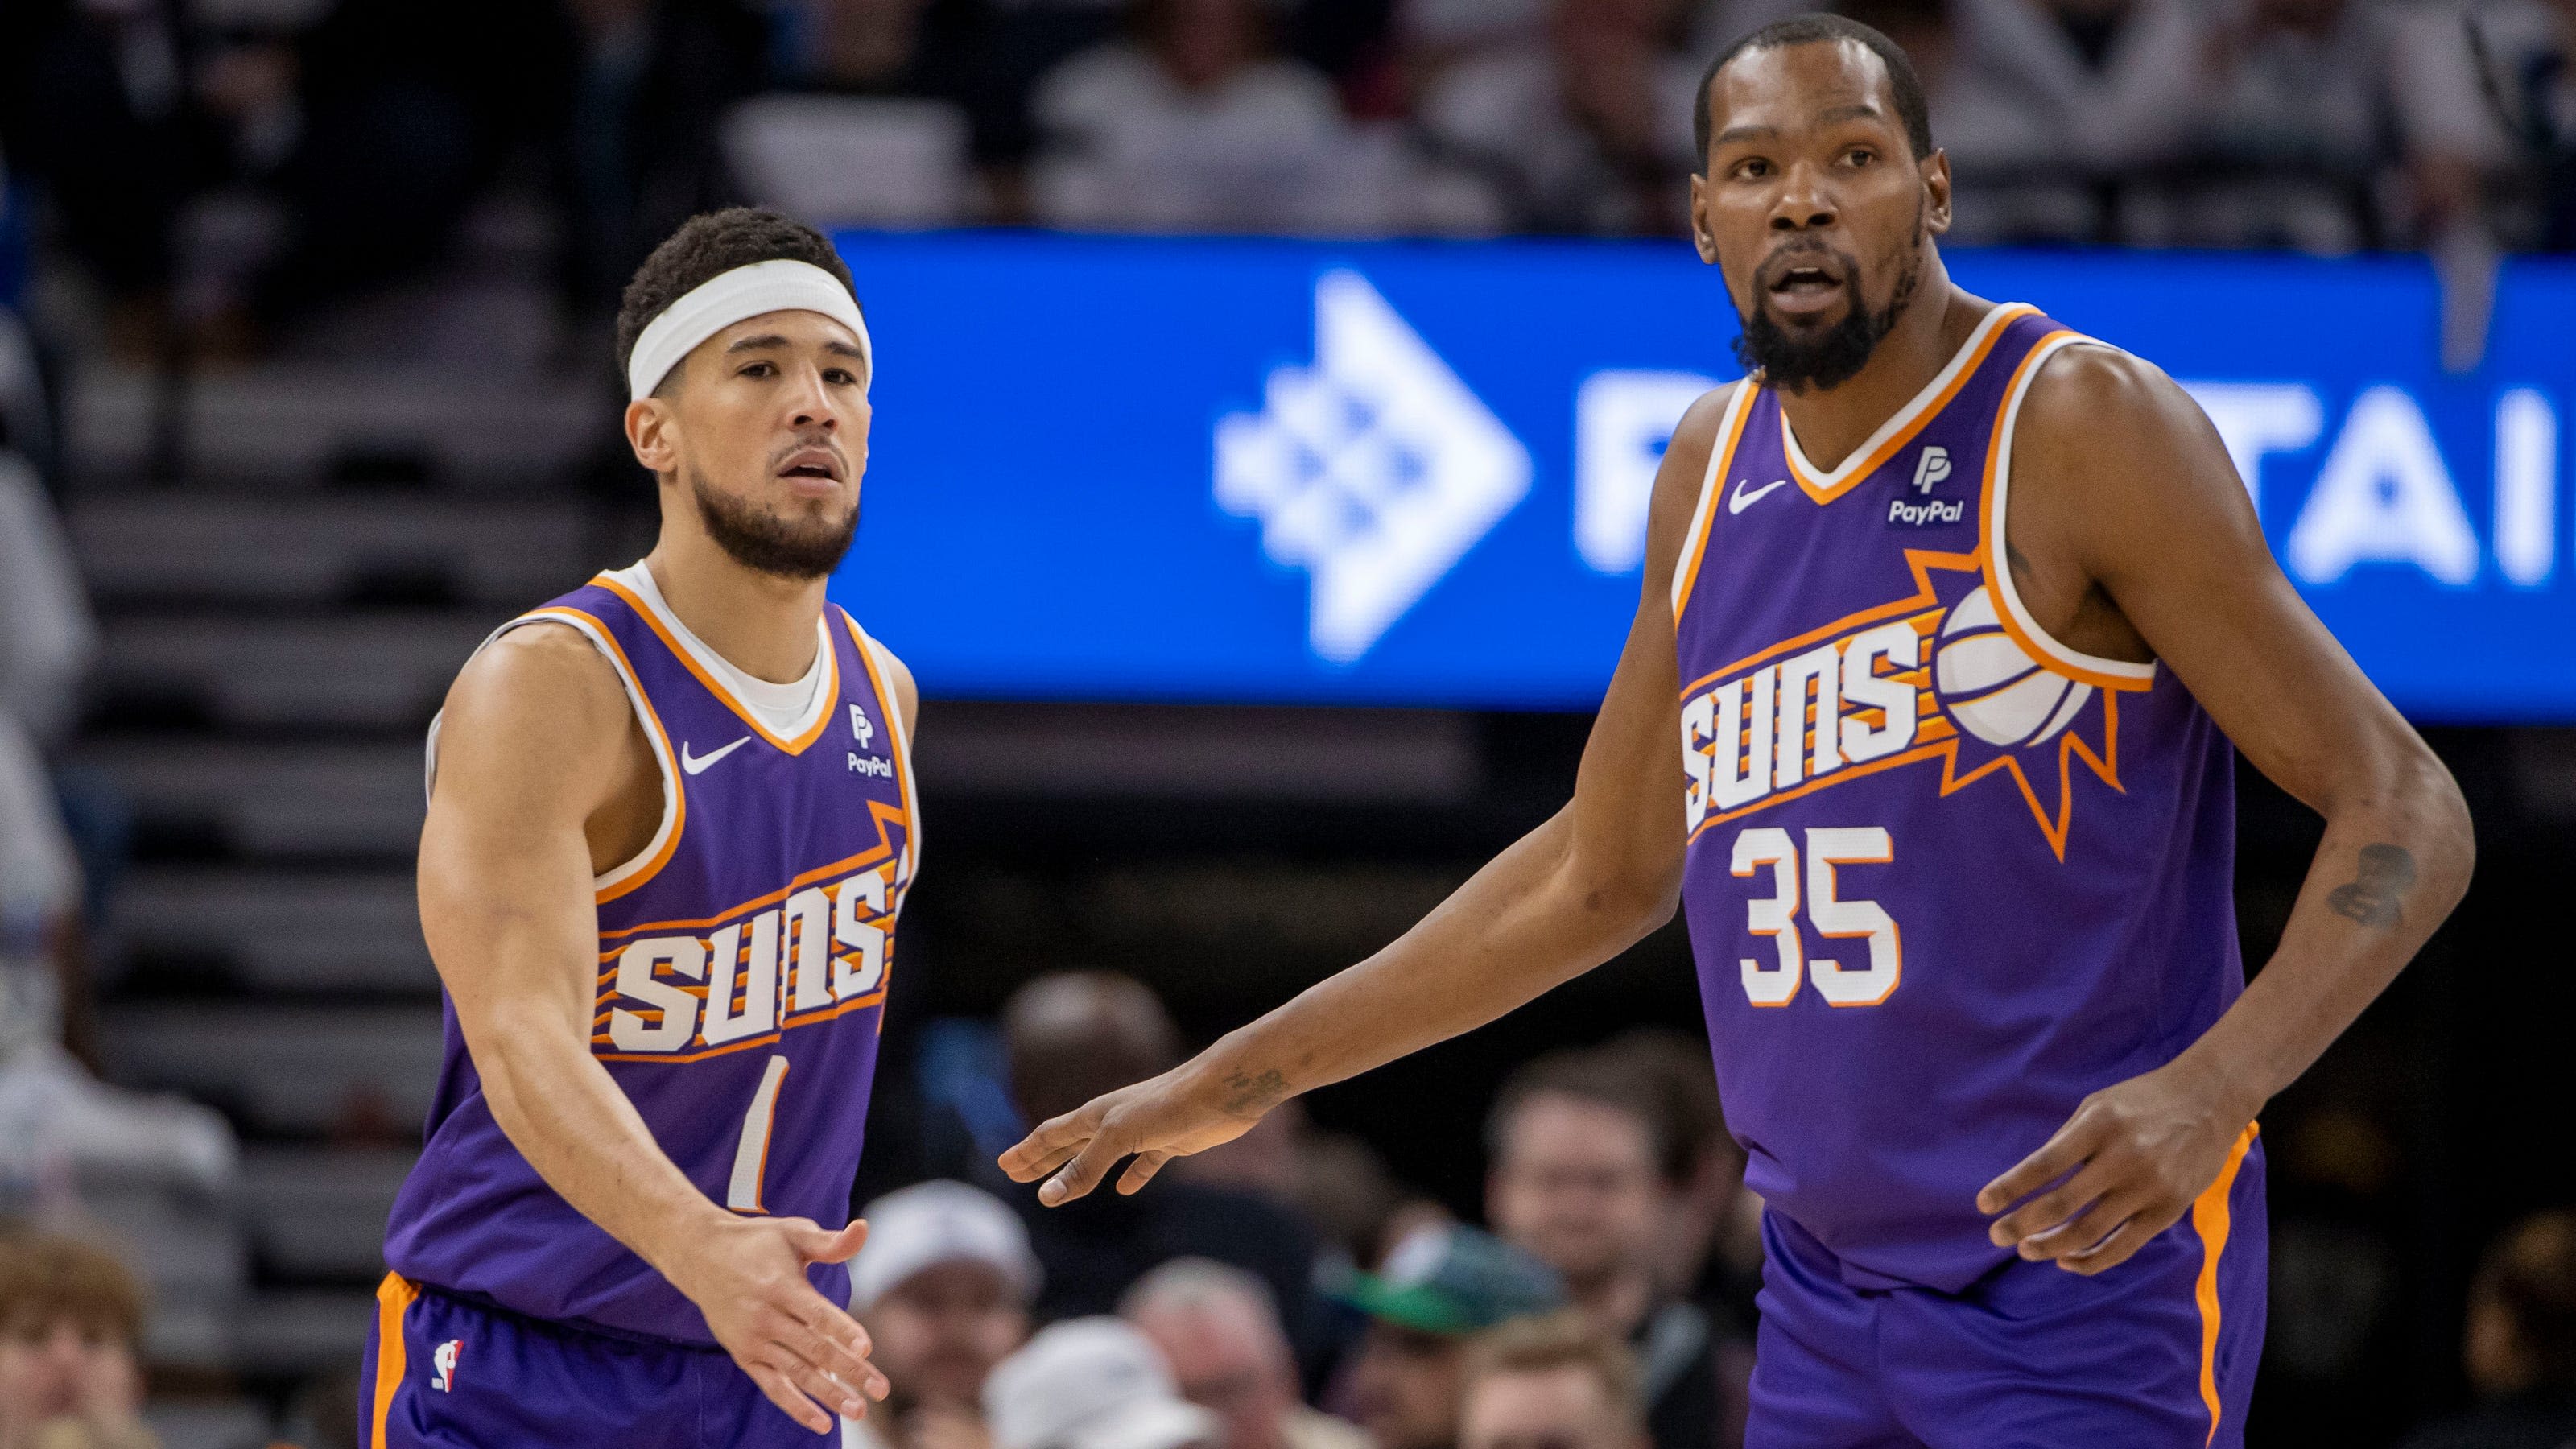 Phoenix Suns' duo of Kevin Durant, Devin Booker earn All-NBA honors